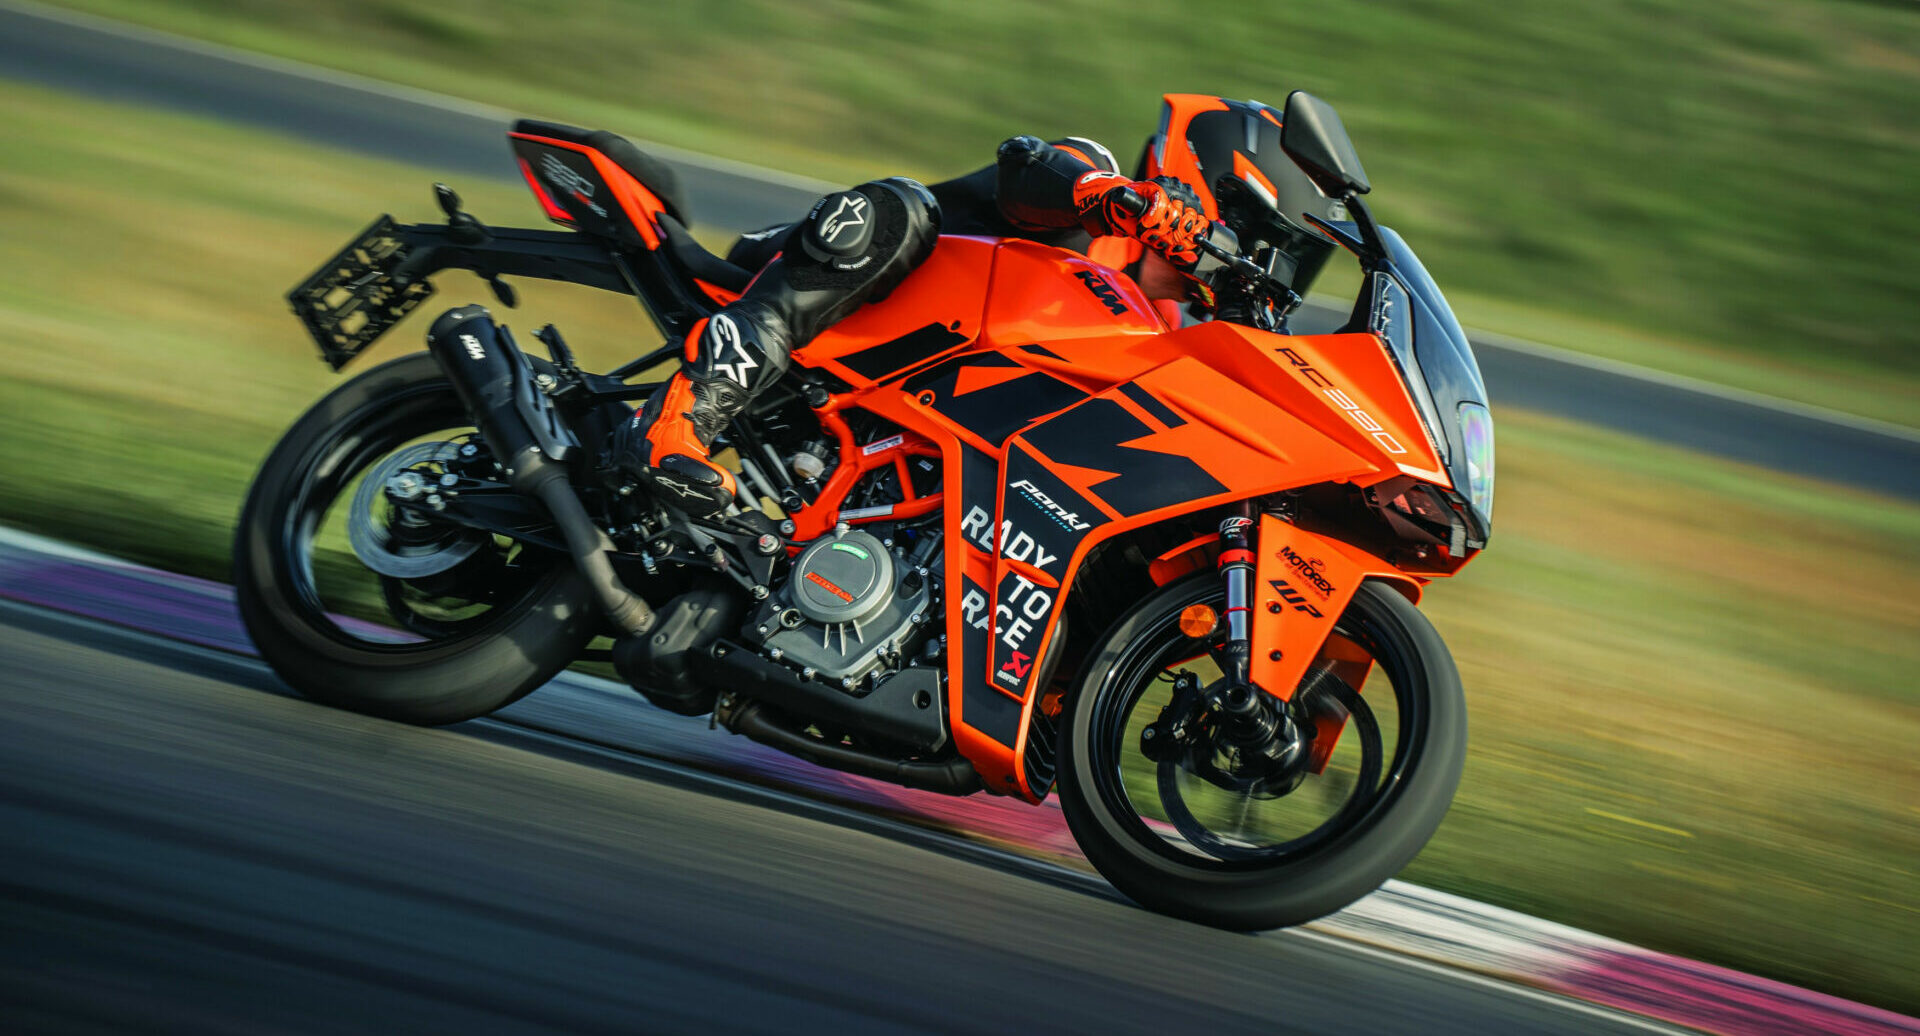 The 2023 KTM RC 390 is available in a new GP Orange color scheme. Photo courtesy KTM.